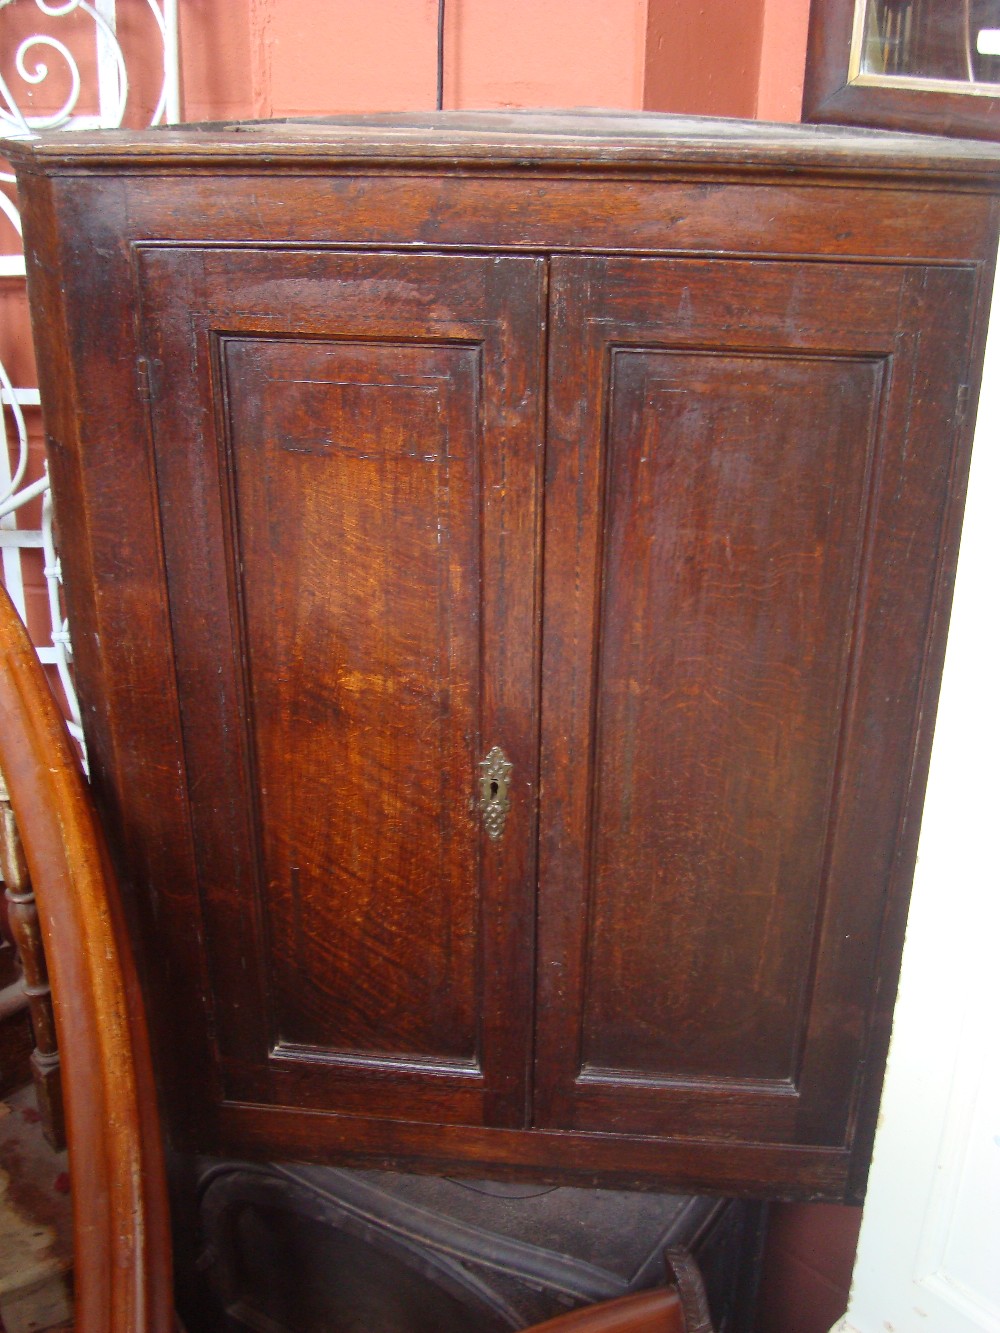 A George III oak hanging corner cupboard, with panelled doors enclosing shelves with shaped edges. - Image 2 of 2